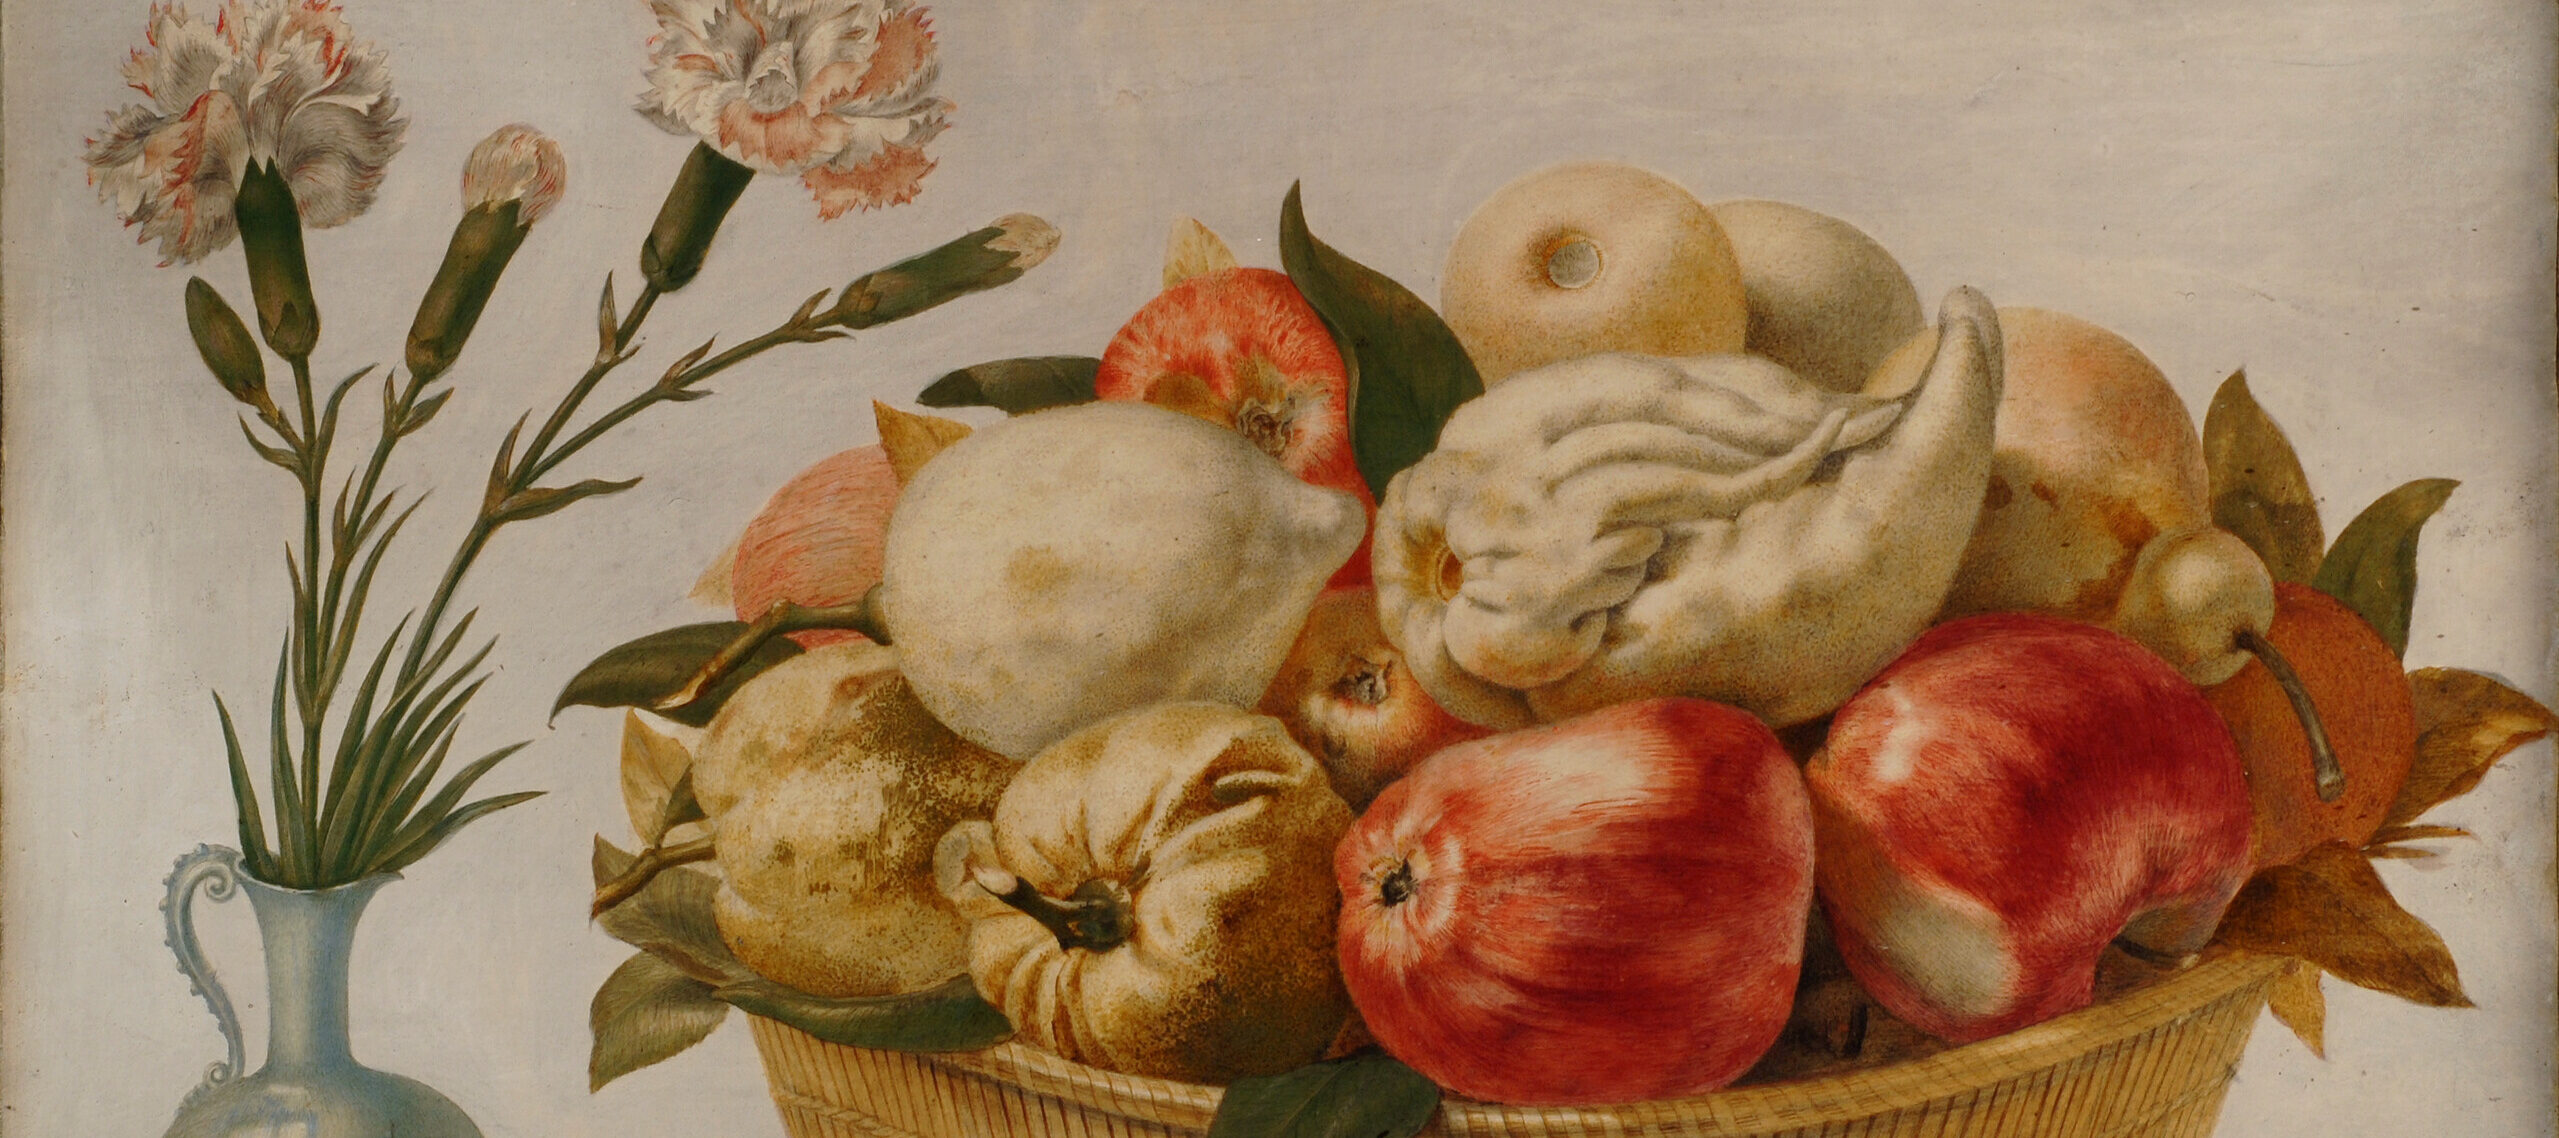 A round, straw basket filled with red apples and pale fruits and vegetables on a stone ledge against a light background. A light blue vase with pink and white carnations sits beside the basket. Two oblong, mottled seashells sit in front of the basket and vase.